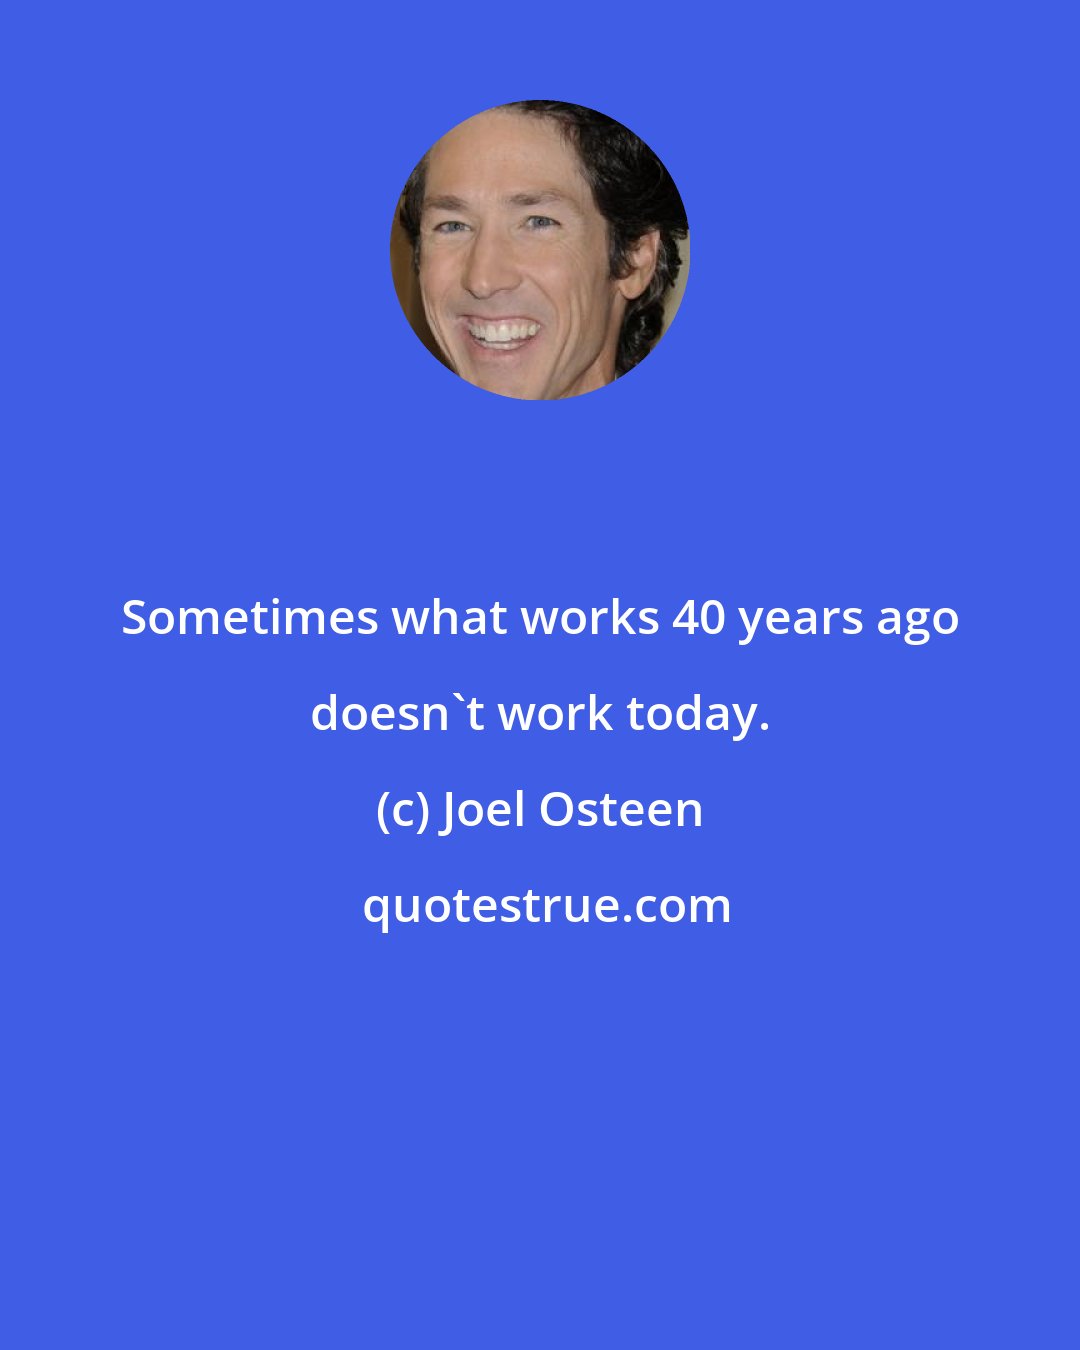 Joel Osteen: Sometimes what works 40 years ago doesn't work today.